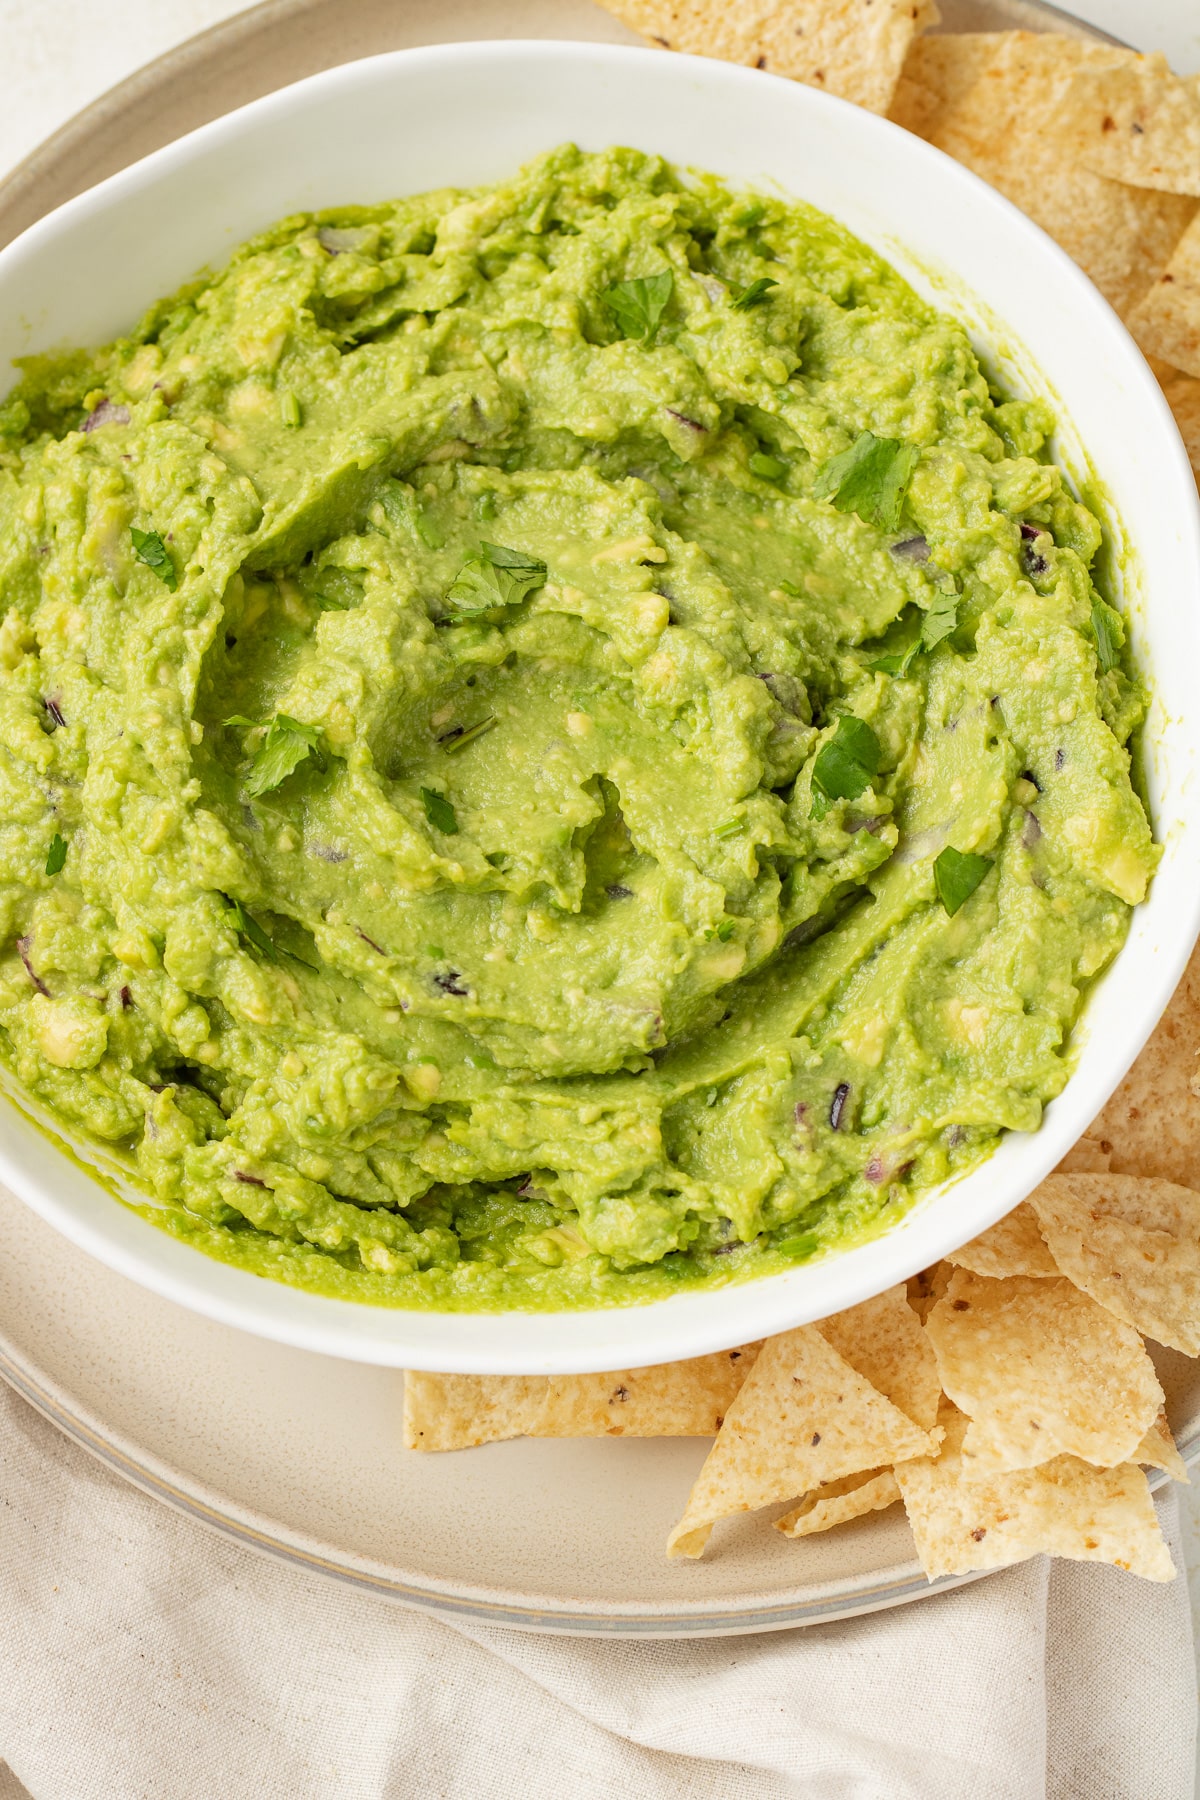 4-ingredient guacamole in a bowl with chips on a plate.